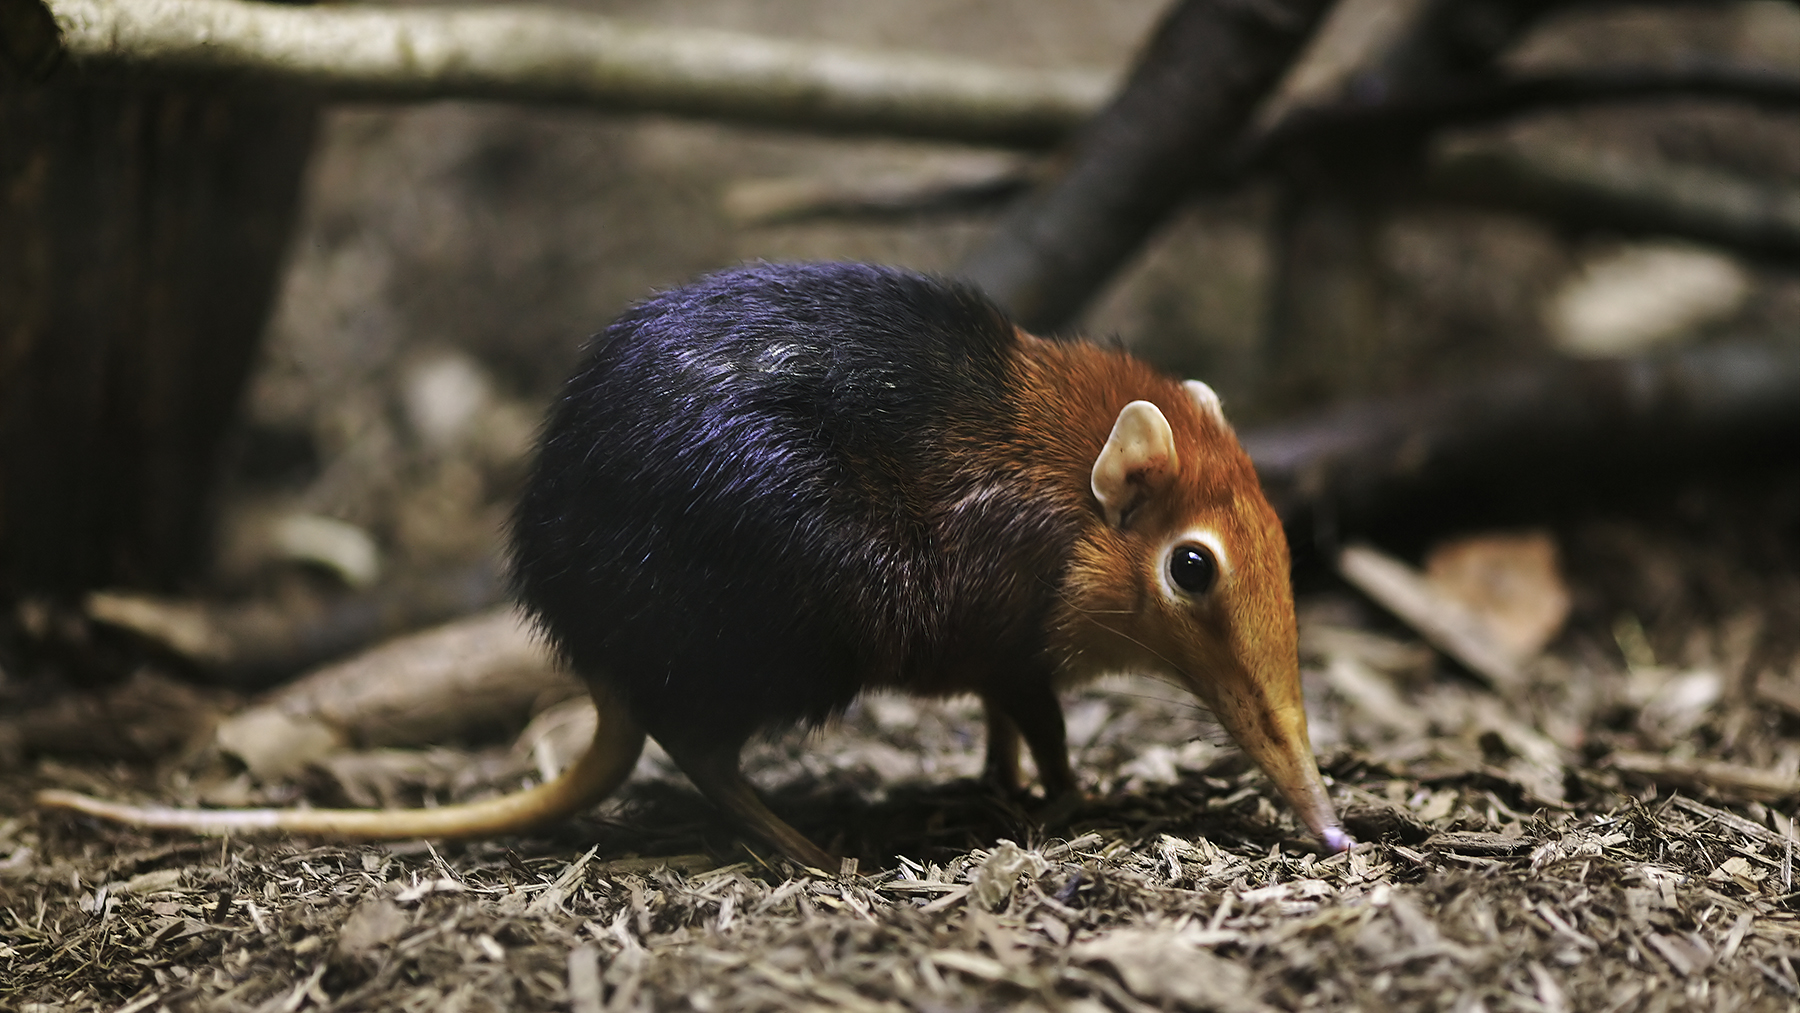 And elephant shrew. the elephant shrew louse was among the earliest diverging lineages of mammalian lice. Photo by Joey Makalintal, CC BY 2.0